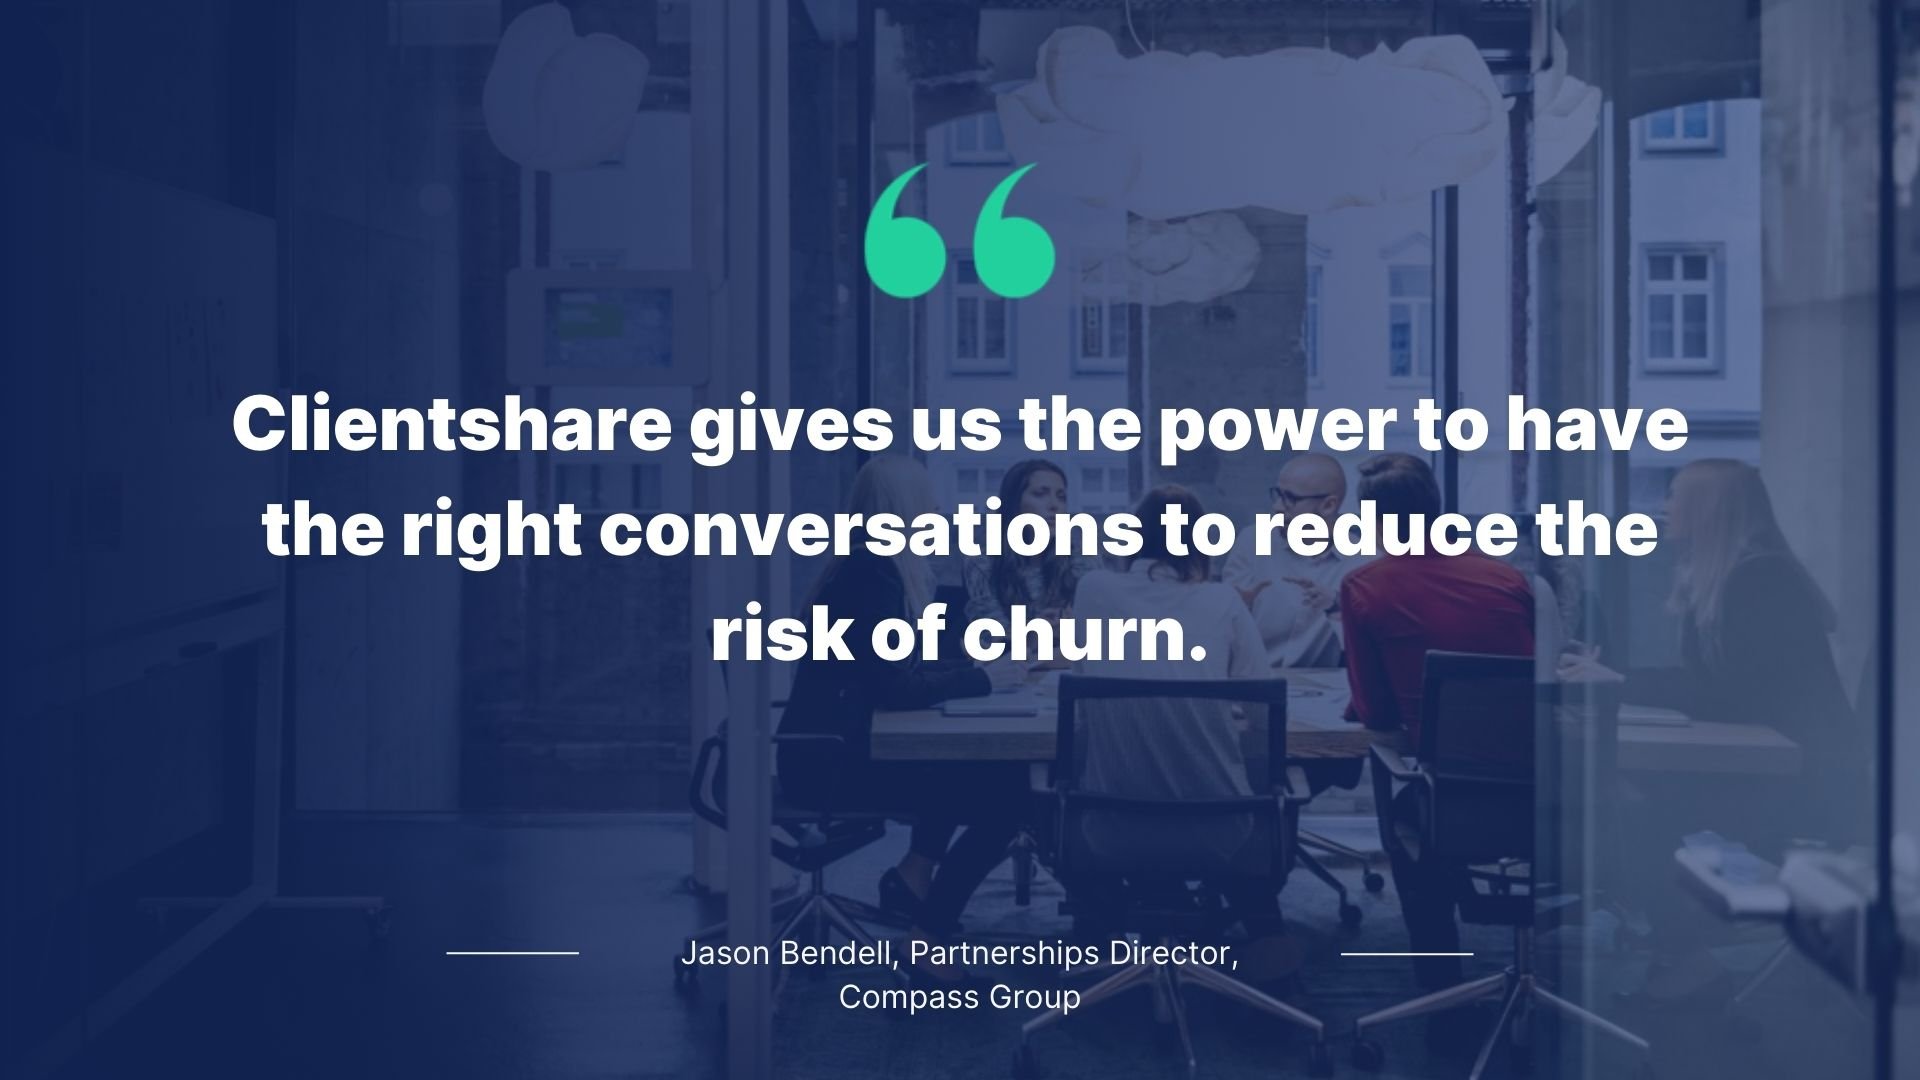 Quote by Jason Bendell, Partnership Director, Compass Group: Clientshare gives us the power to have the right conversations to reduce the risk of churn.